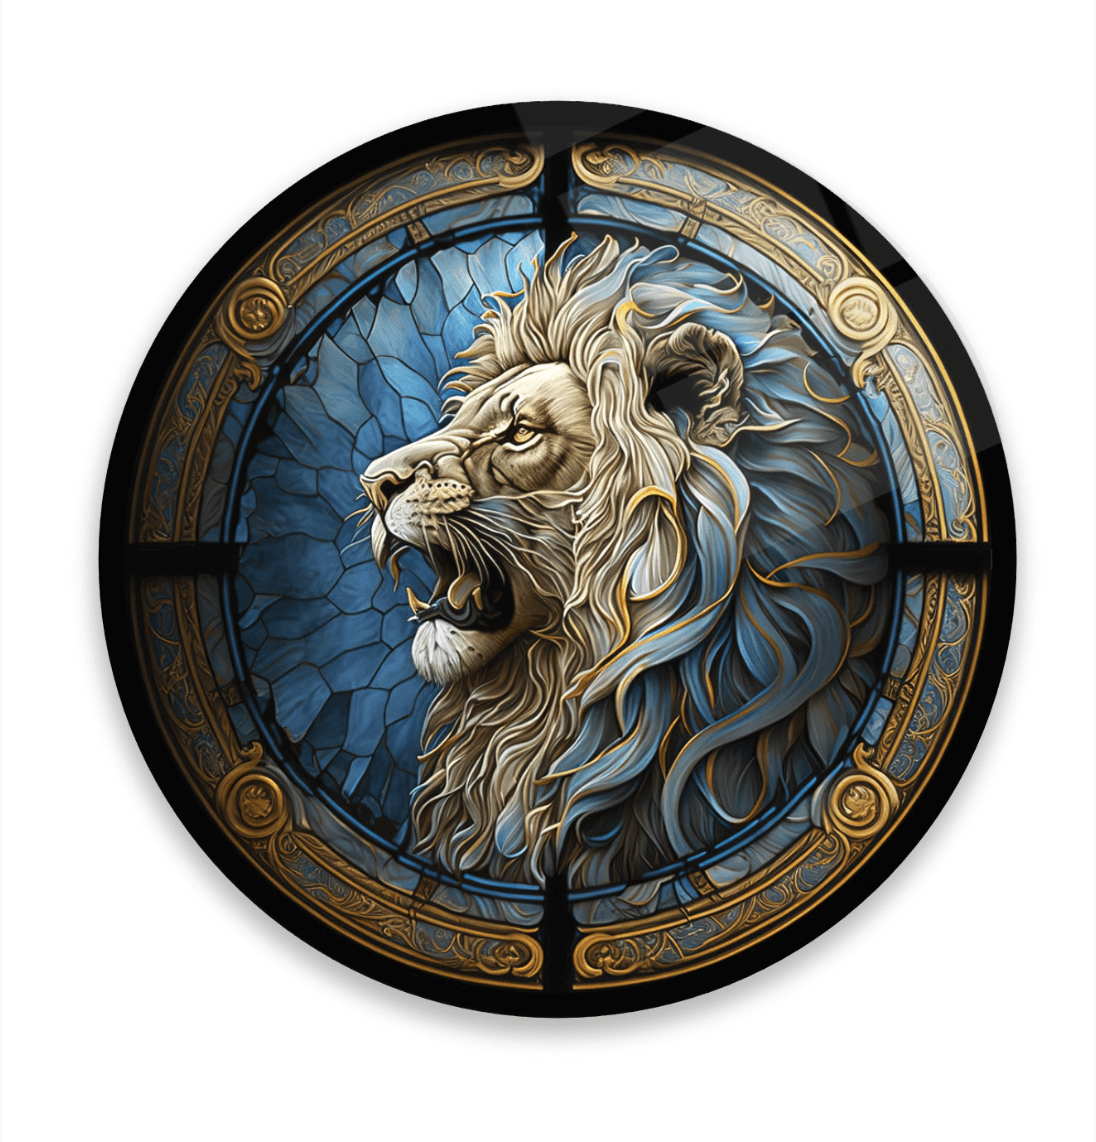 Futuristic Lion Rounded Glass Wall Art